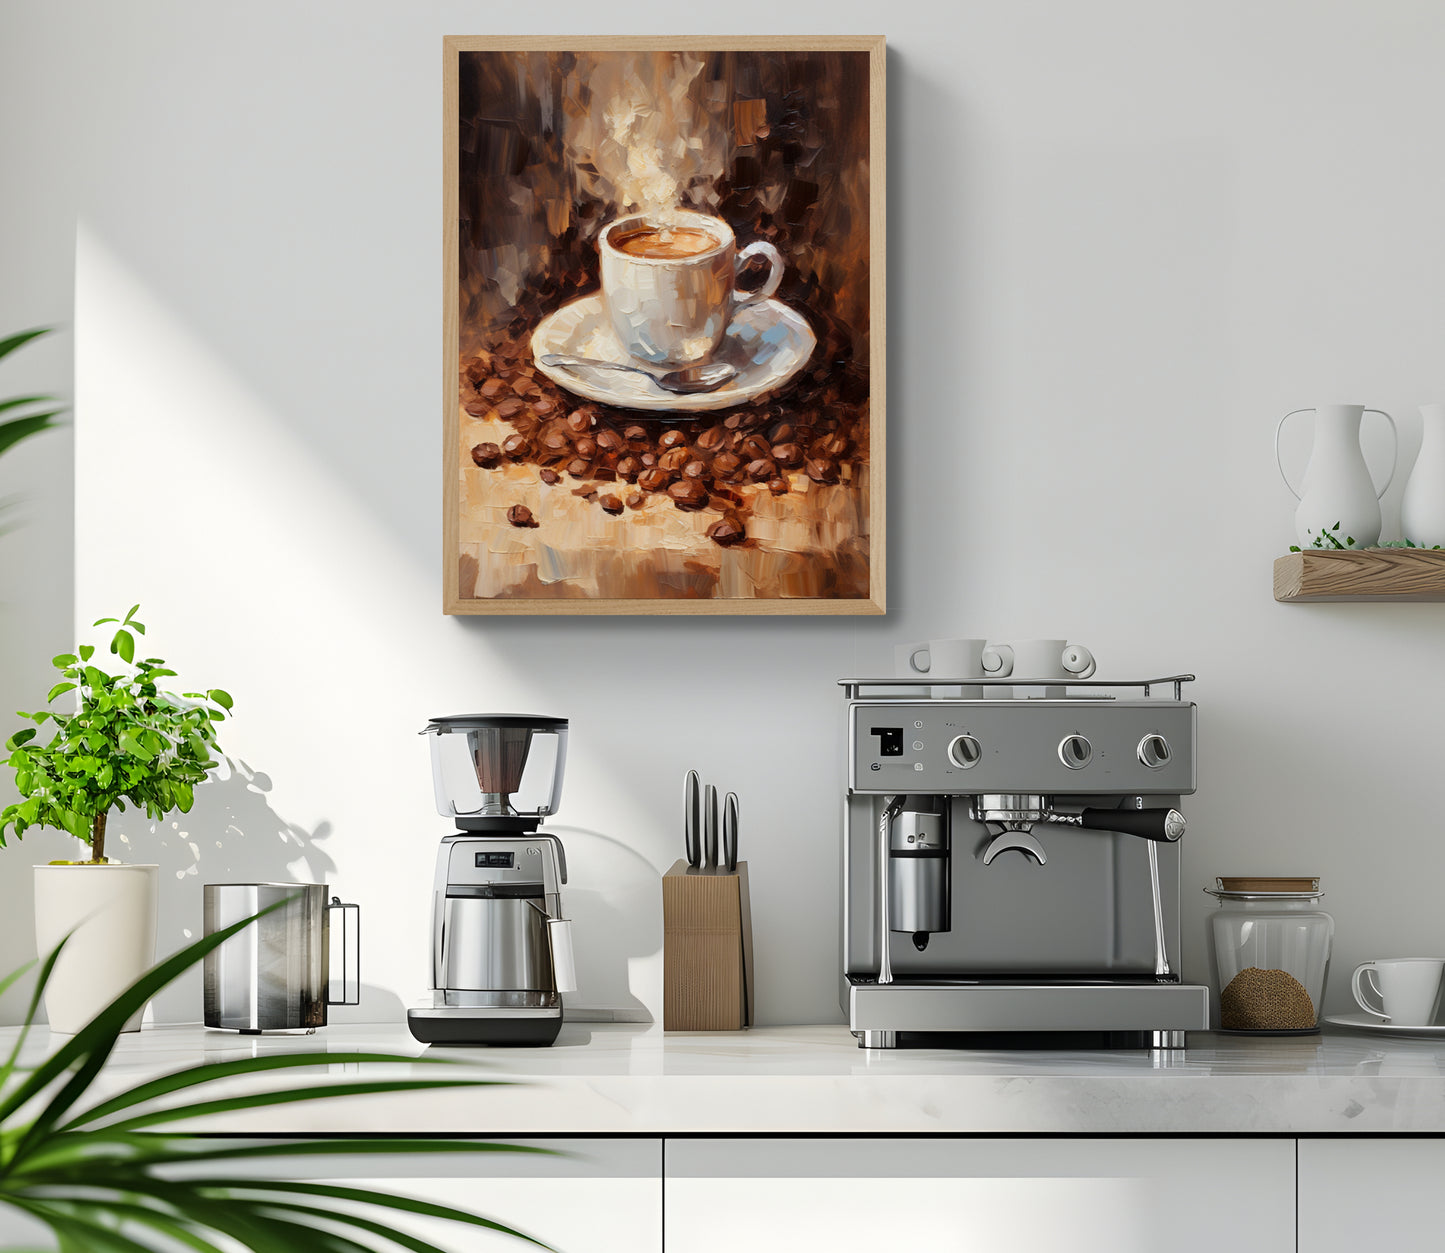 Steaming Cup Of Coffee by Coffee Couture